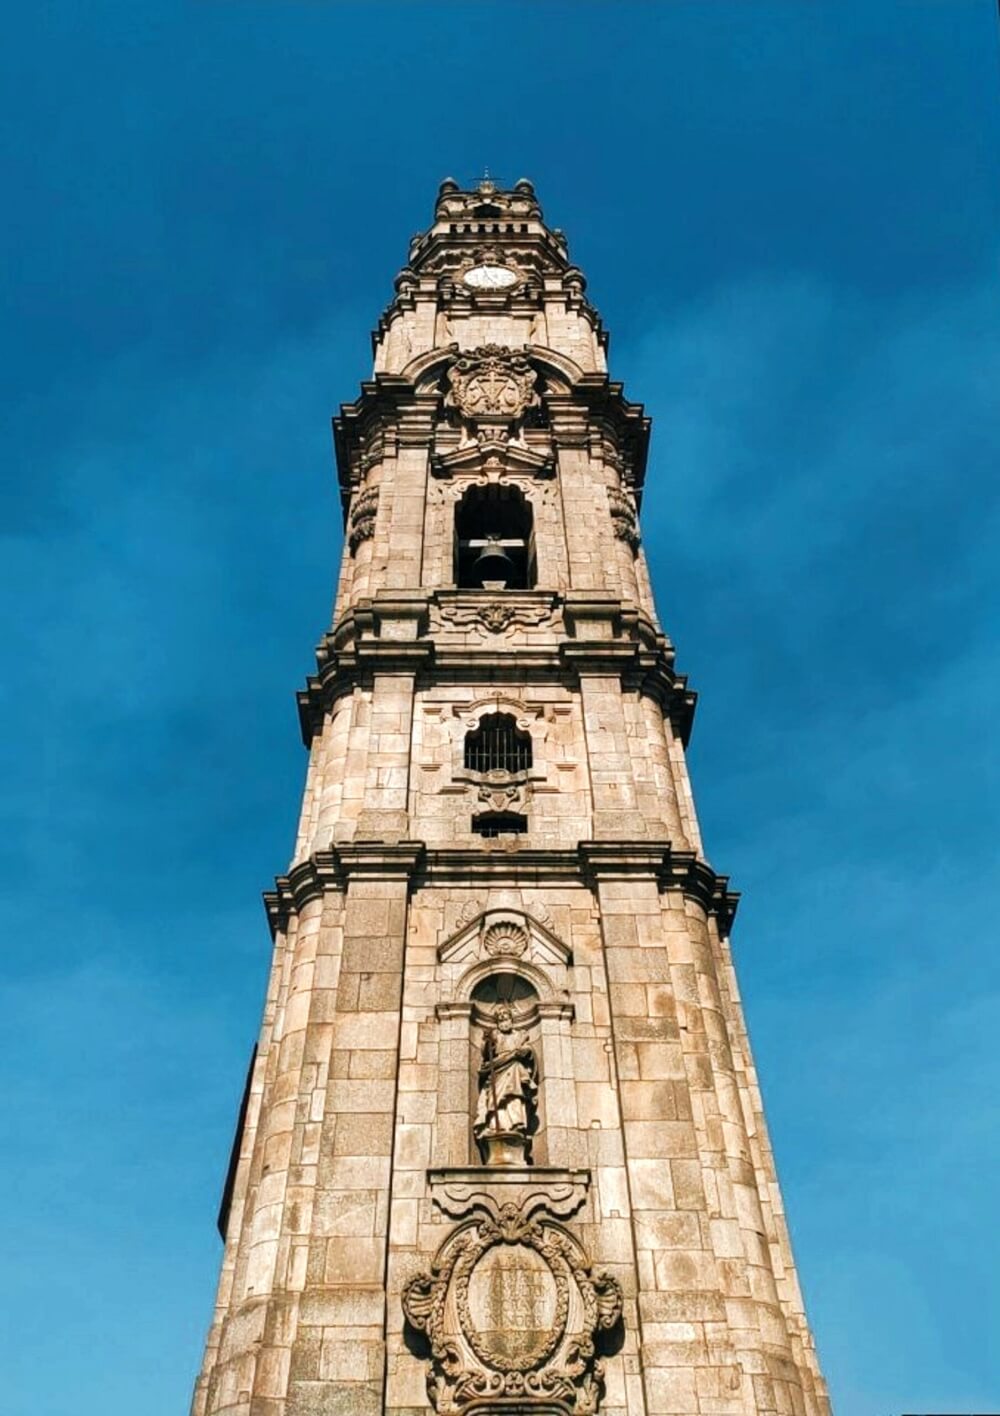 A stone church tower decorated with angels and church bells